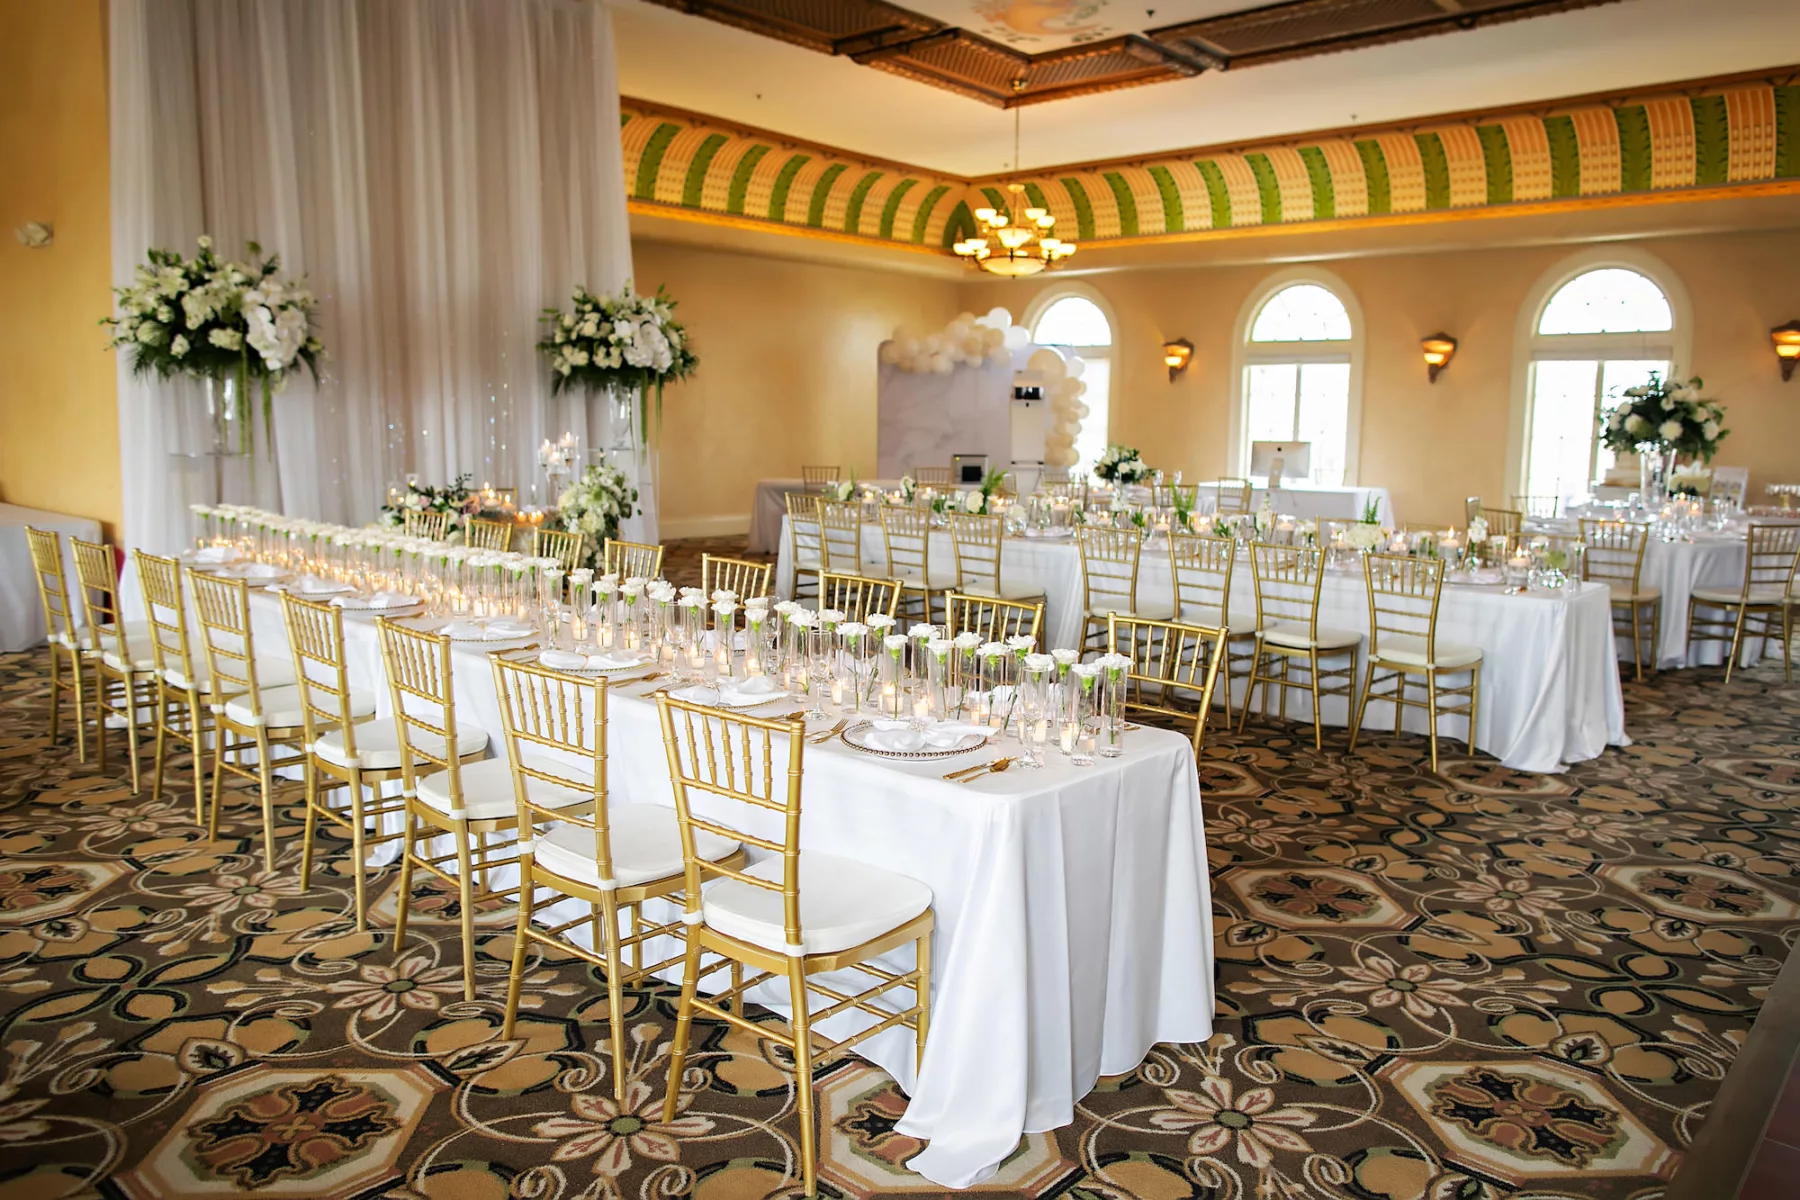 Classic White Italian Inspired Wedding Reception Decor Inspiration | White Drapery, Long Feasting Tables, Gold Chiavari Chairs | Ybor Planner Coastal Coordinating | Outside The Box Event Rentals